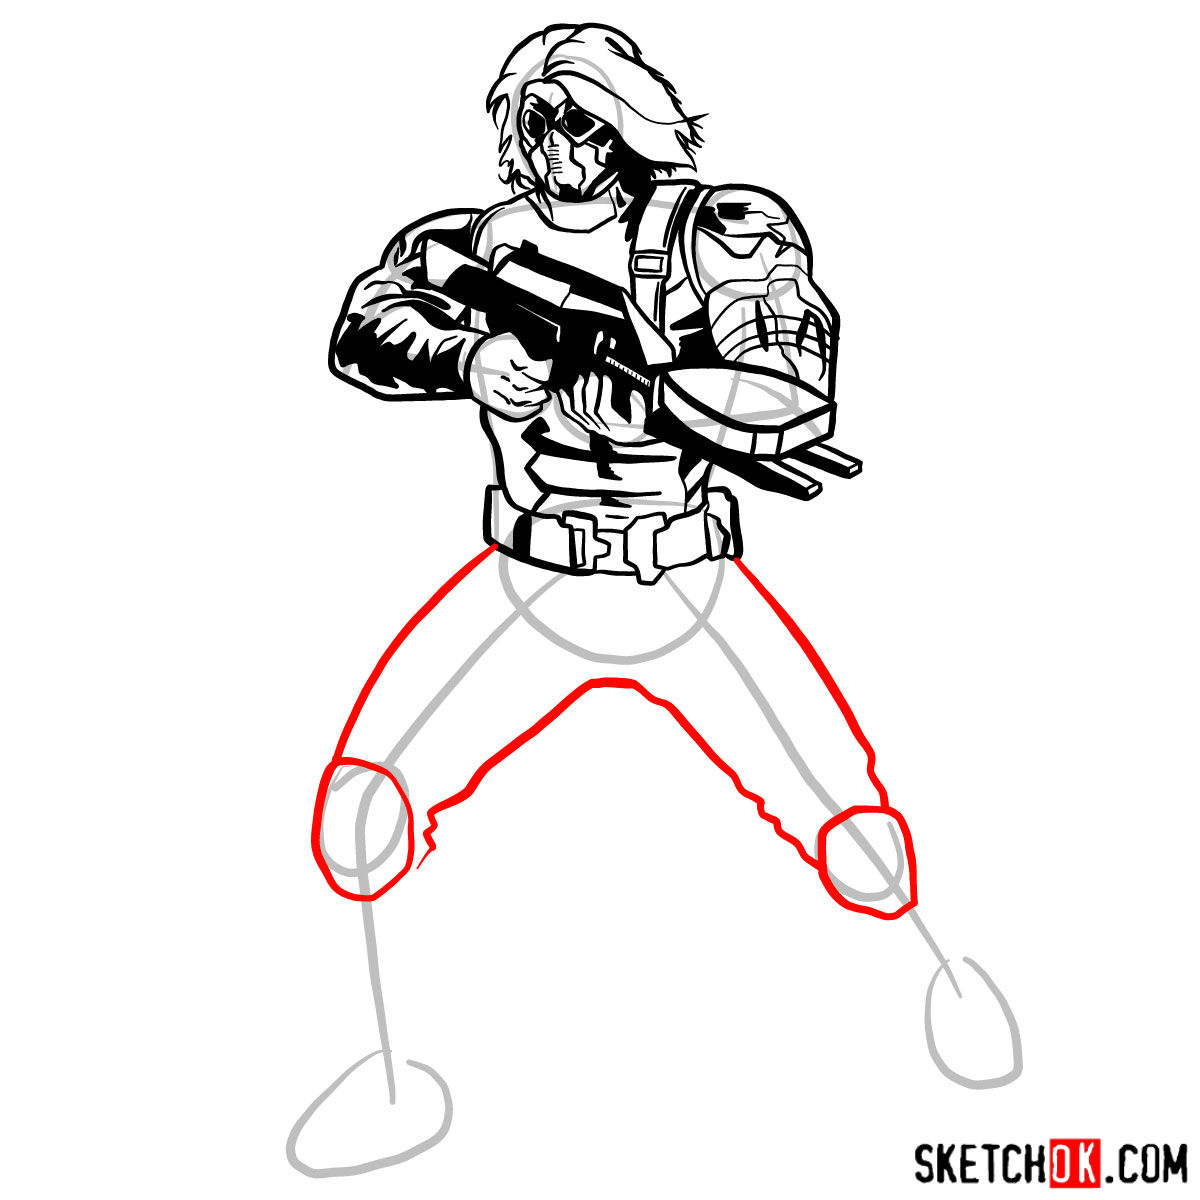 How to draw Bucky Barnes the Winter Soldier - step 13